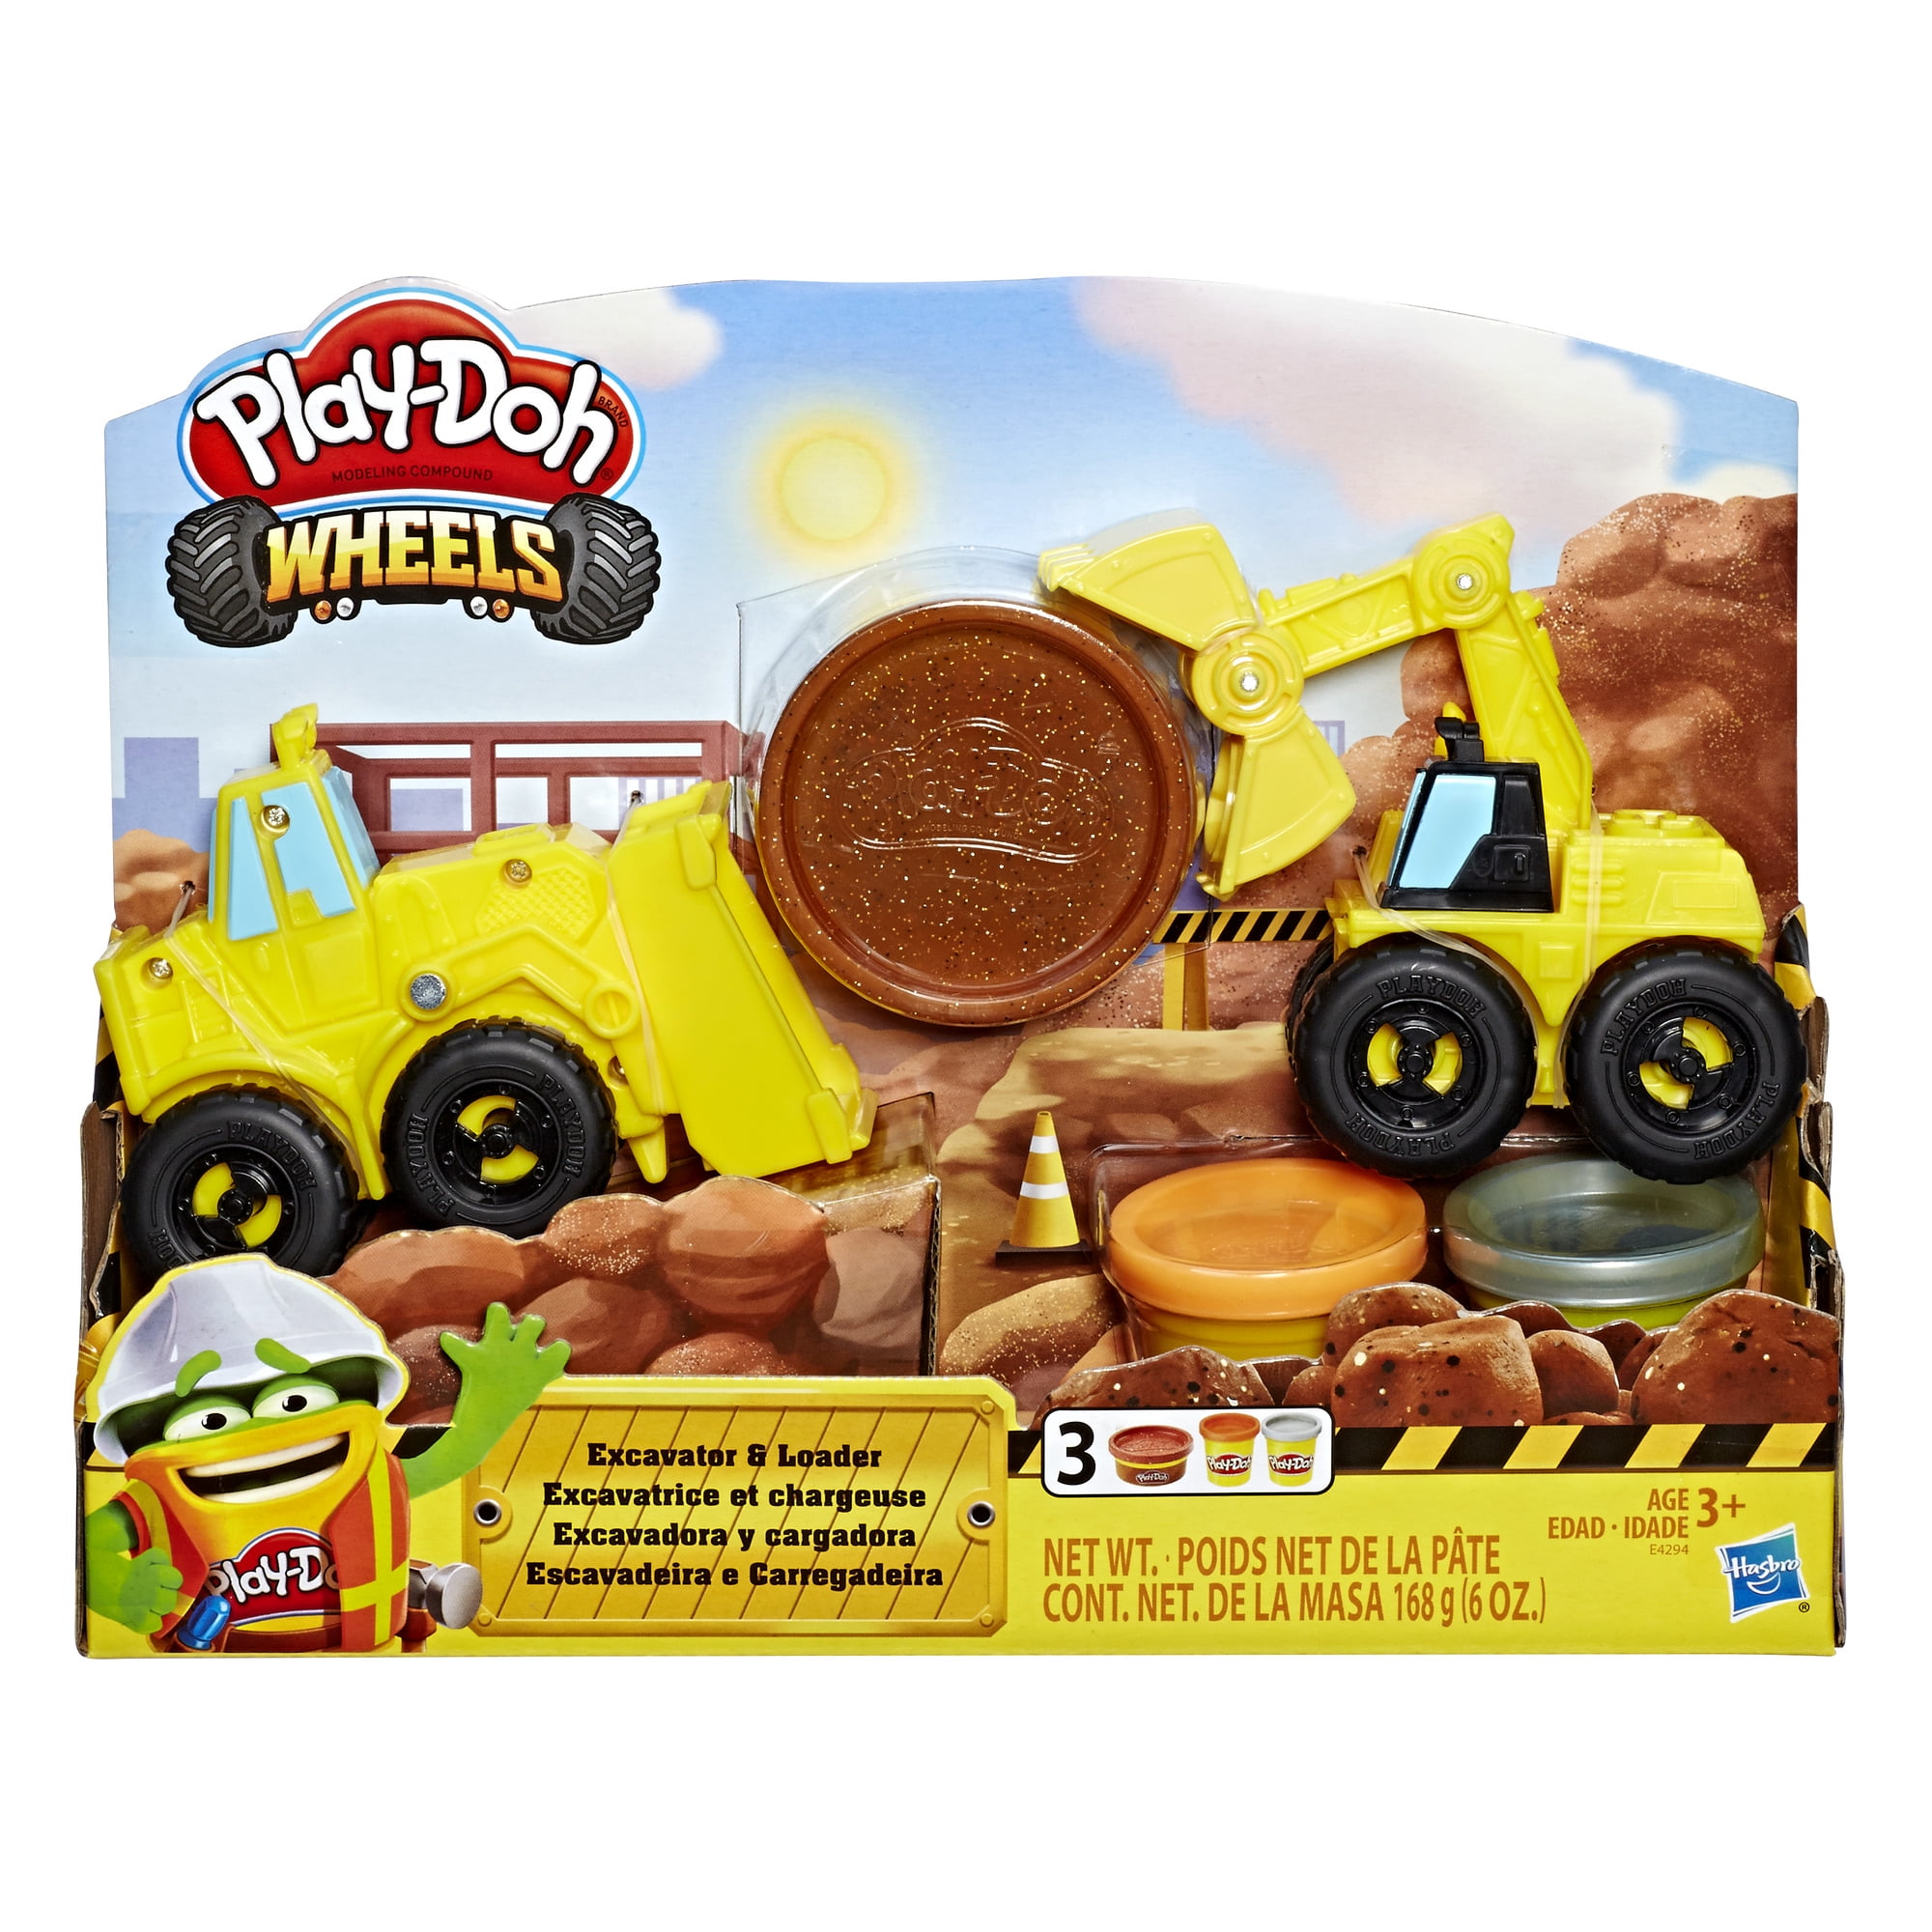 play doh hot wheels mold and launch